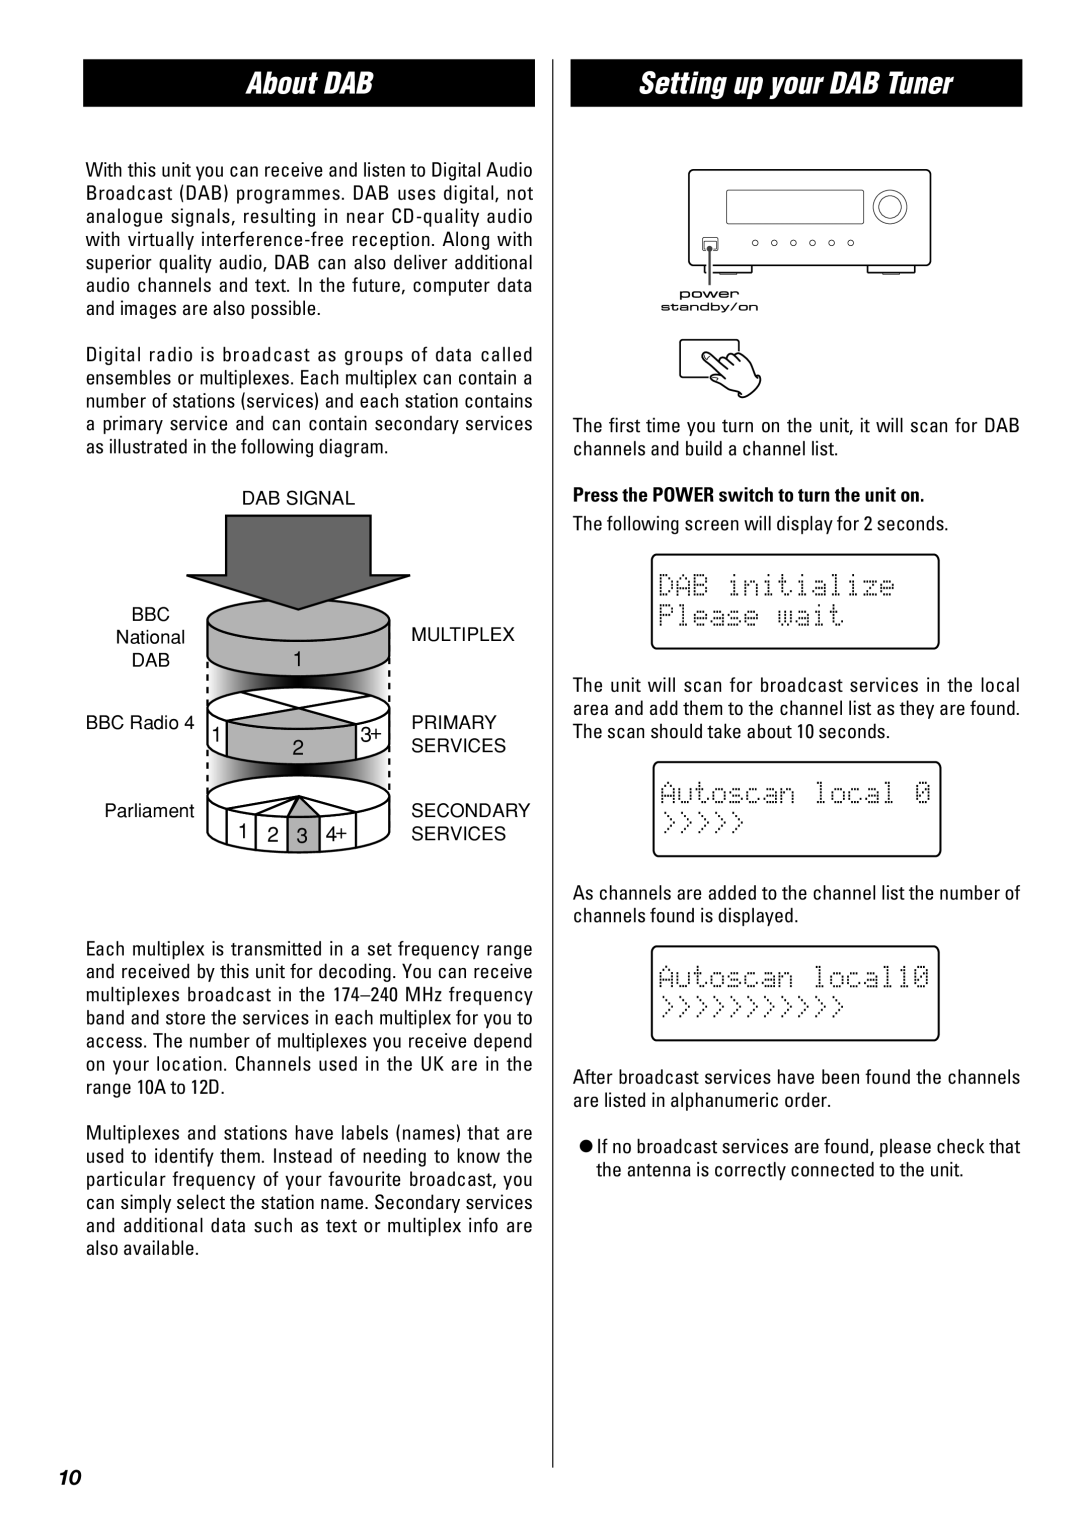 Teac T-H300DAB owner manual About DAB, Setting up your DAB Tuner, Press the POWER switch to turn the unit on 